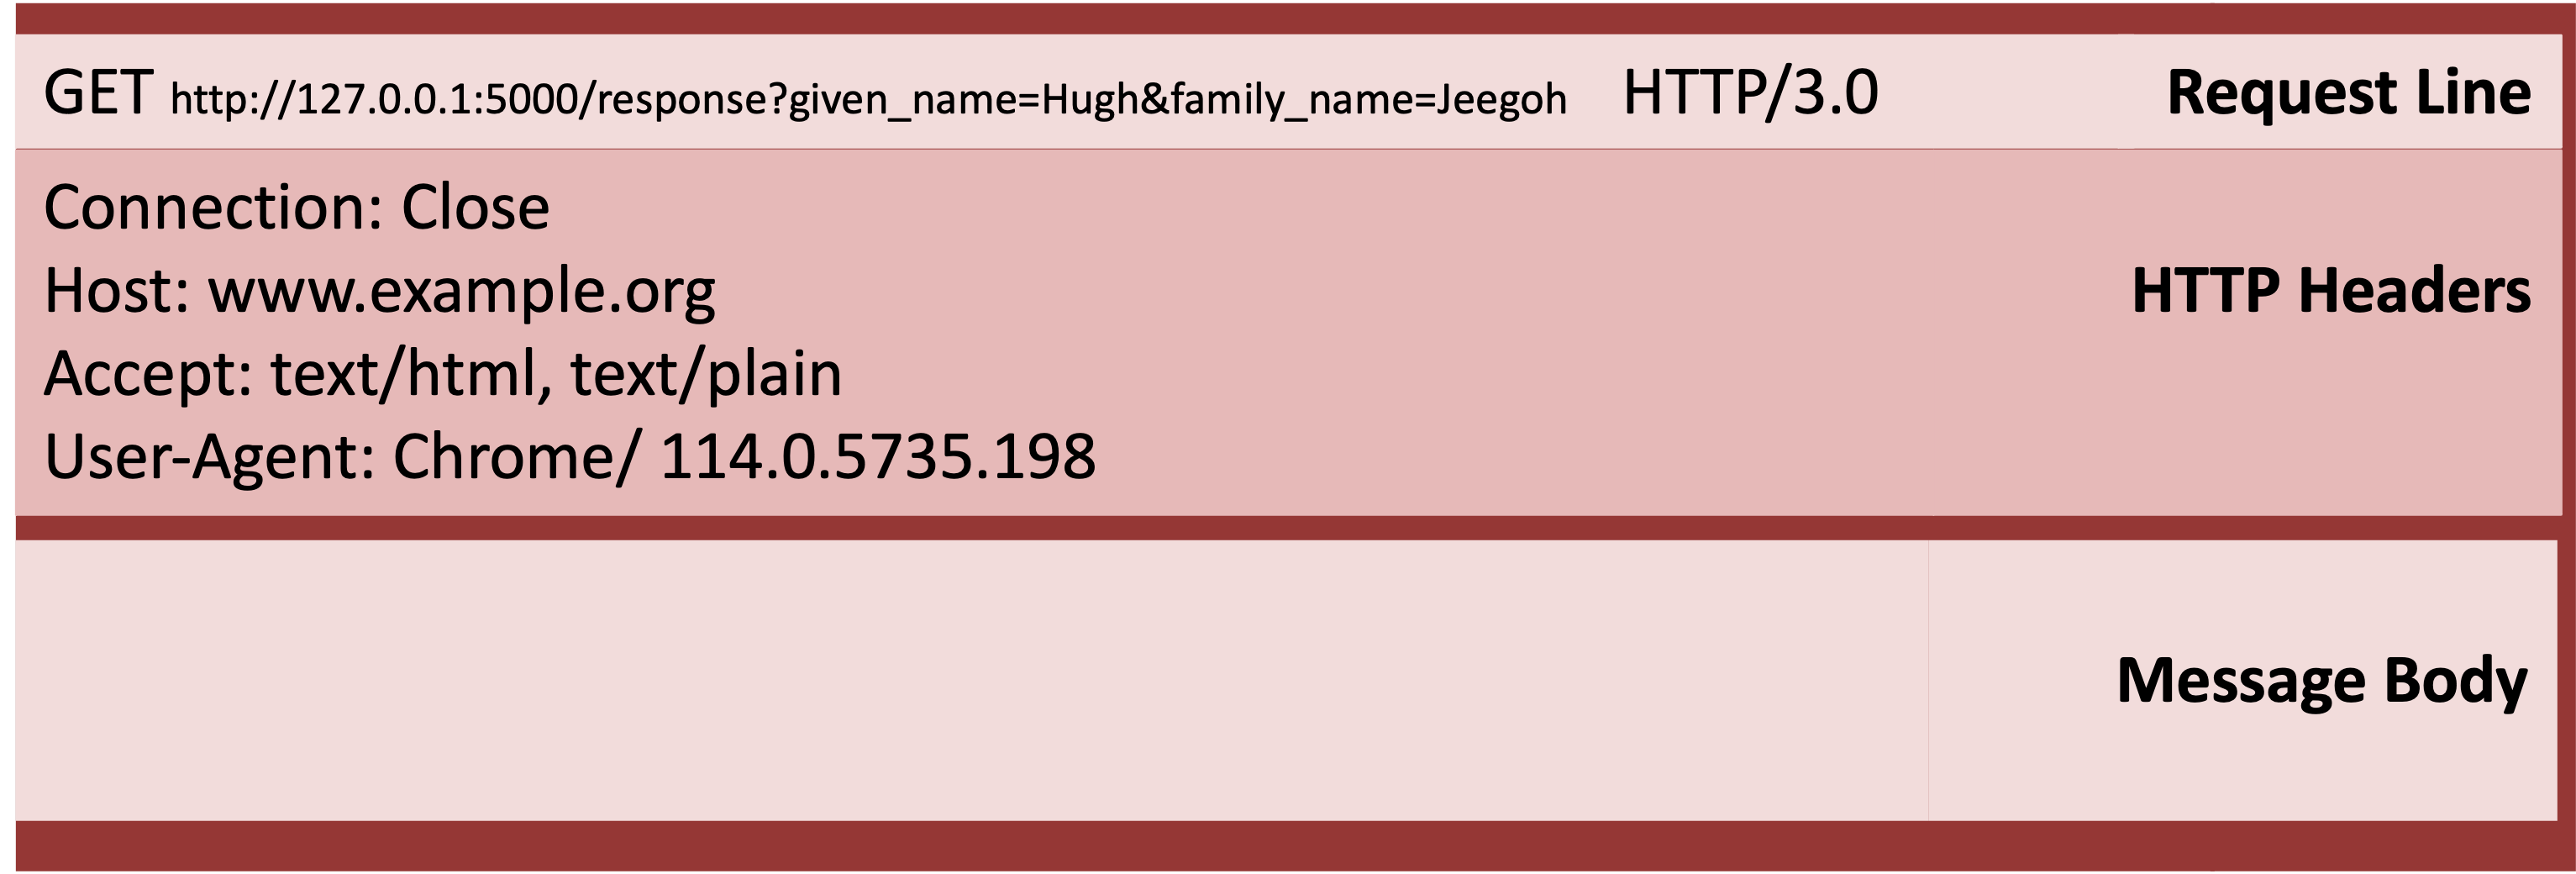 The user's data is on the end of the URL.